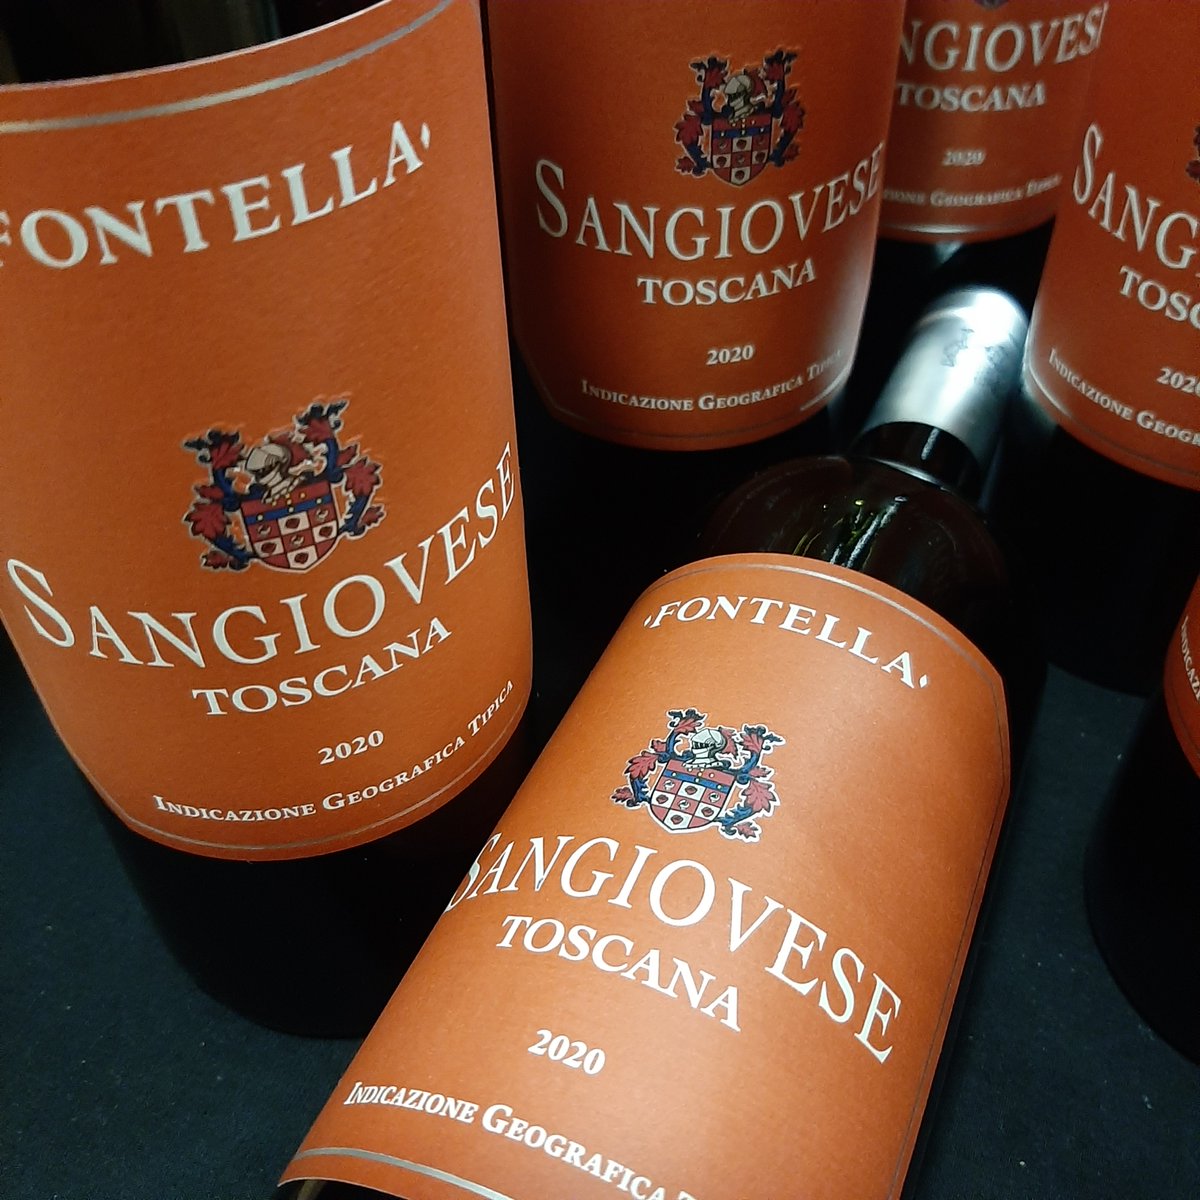 Our Wine of The Month, the Fontella Sangiovese, has been added to our #italianwinesale! Now priced at €12.99 for a limited time only, this is a delightful red ideal to serve with a range of pizza & pasta dishes. Available in-store or order online @ bit.ly/FontellaSangio…